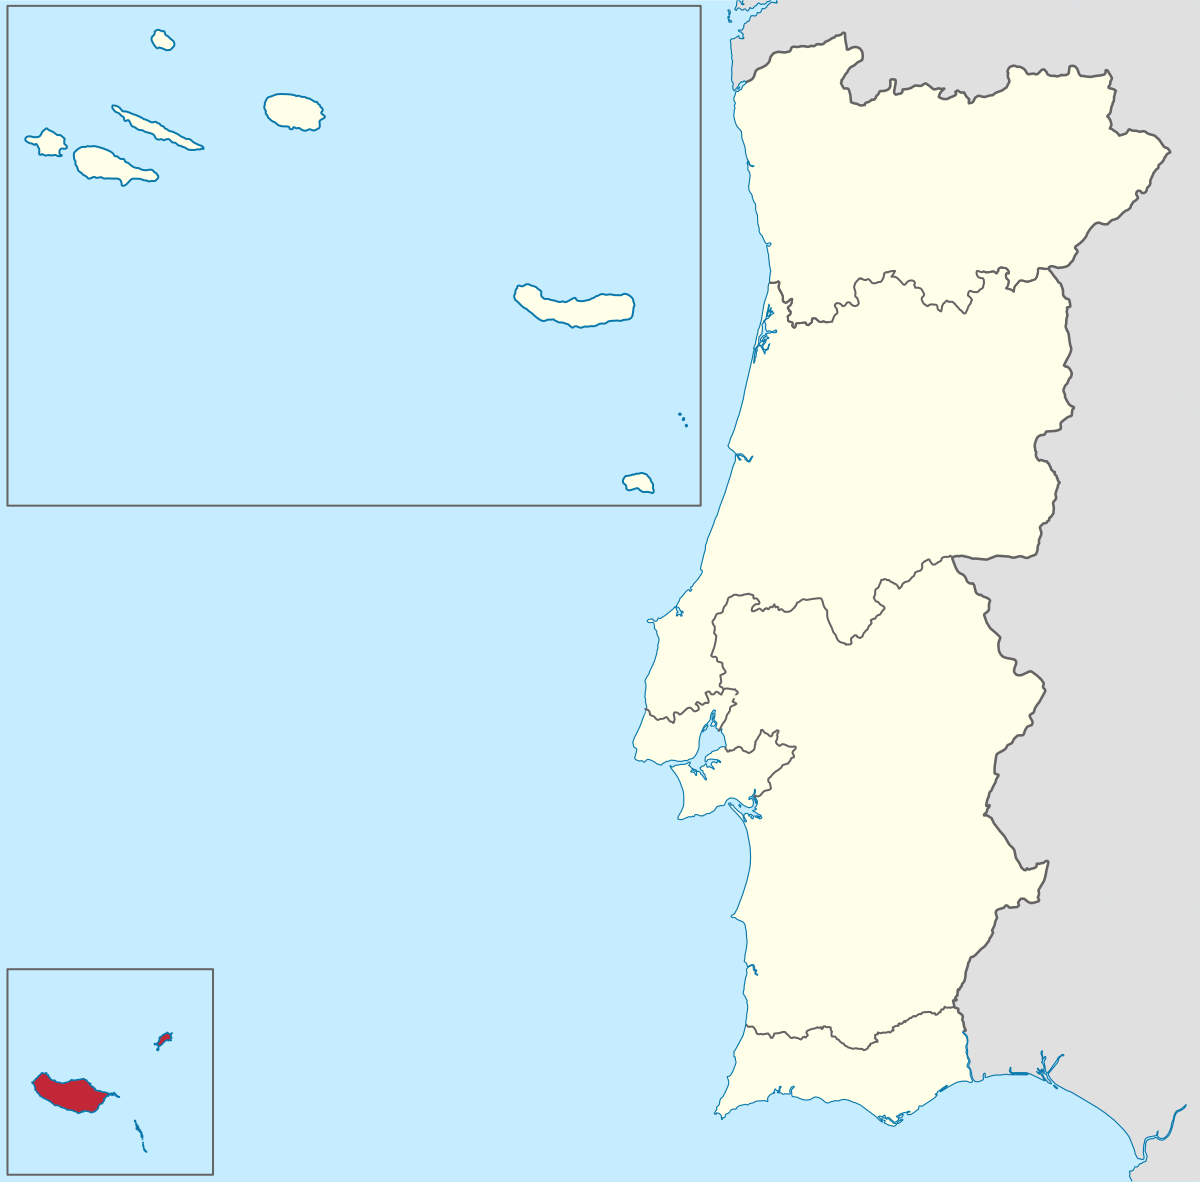 File:Portugal location map (with islands).svg - Wikimedia Commons